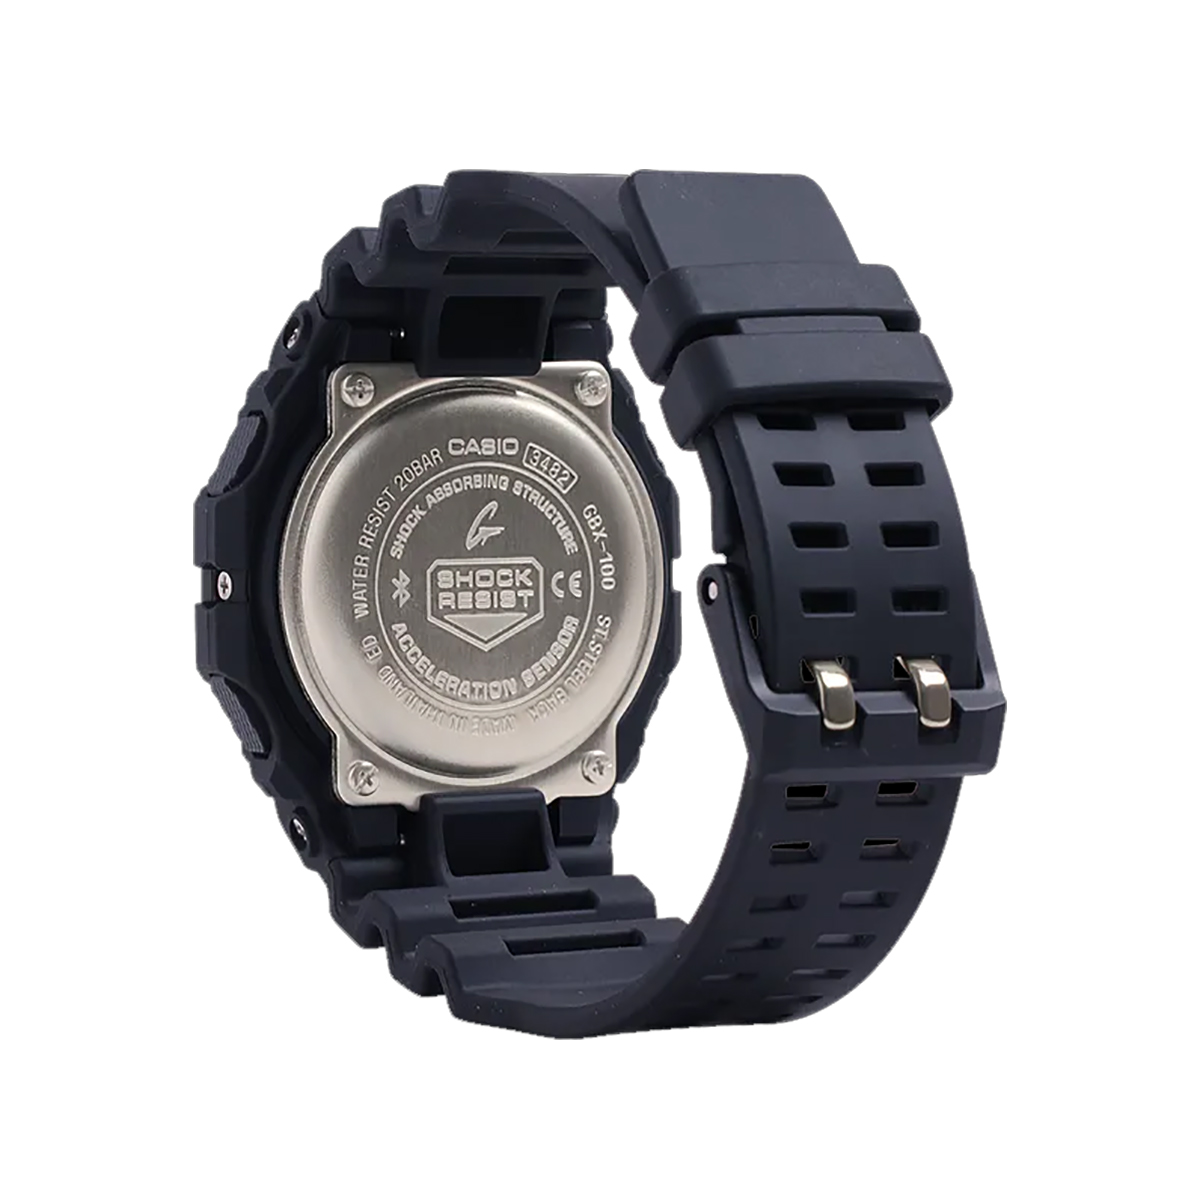 Casio G-Shock GBX100, , large image number null